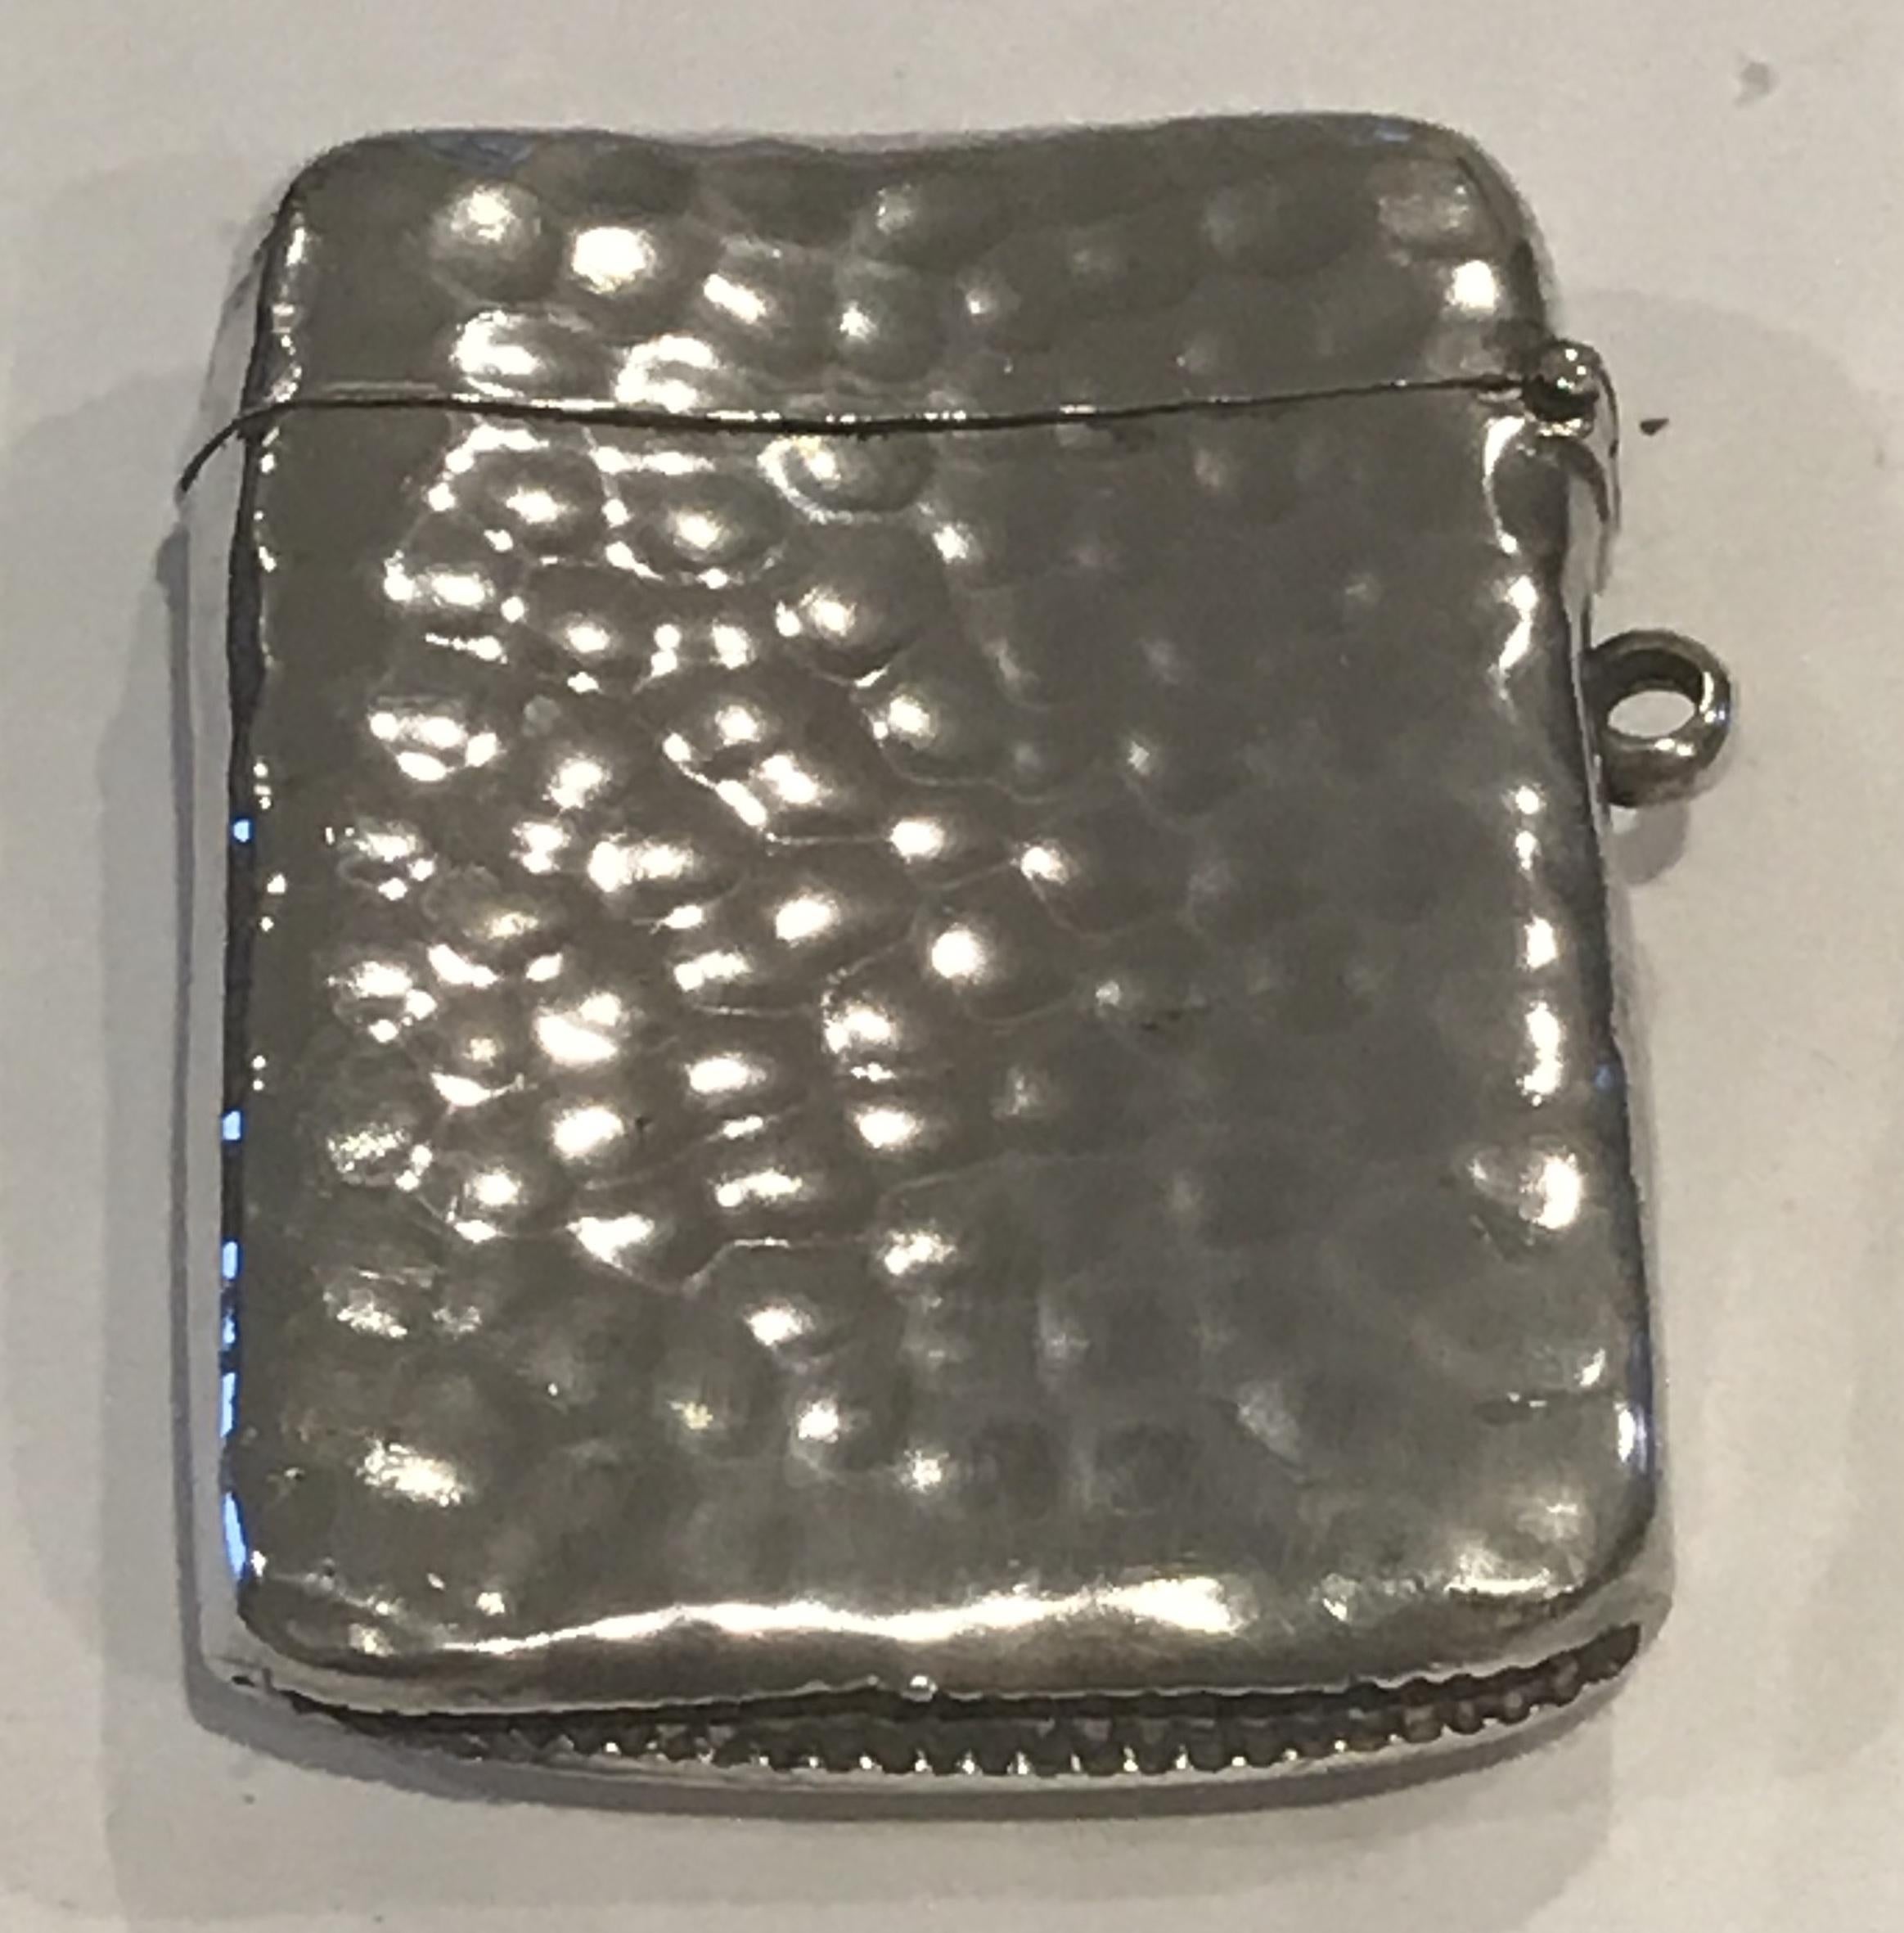 Rare Liberty London 1899 Solid Sterling Silver Vesta Case William Hair Haseler 12